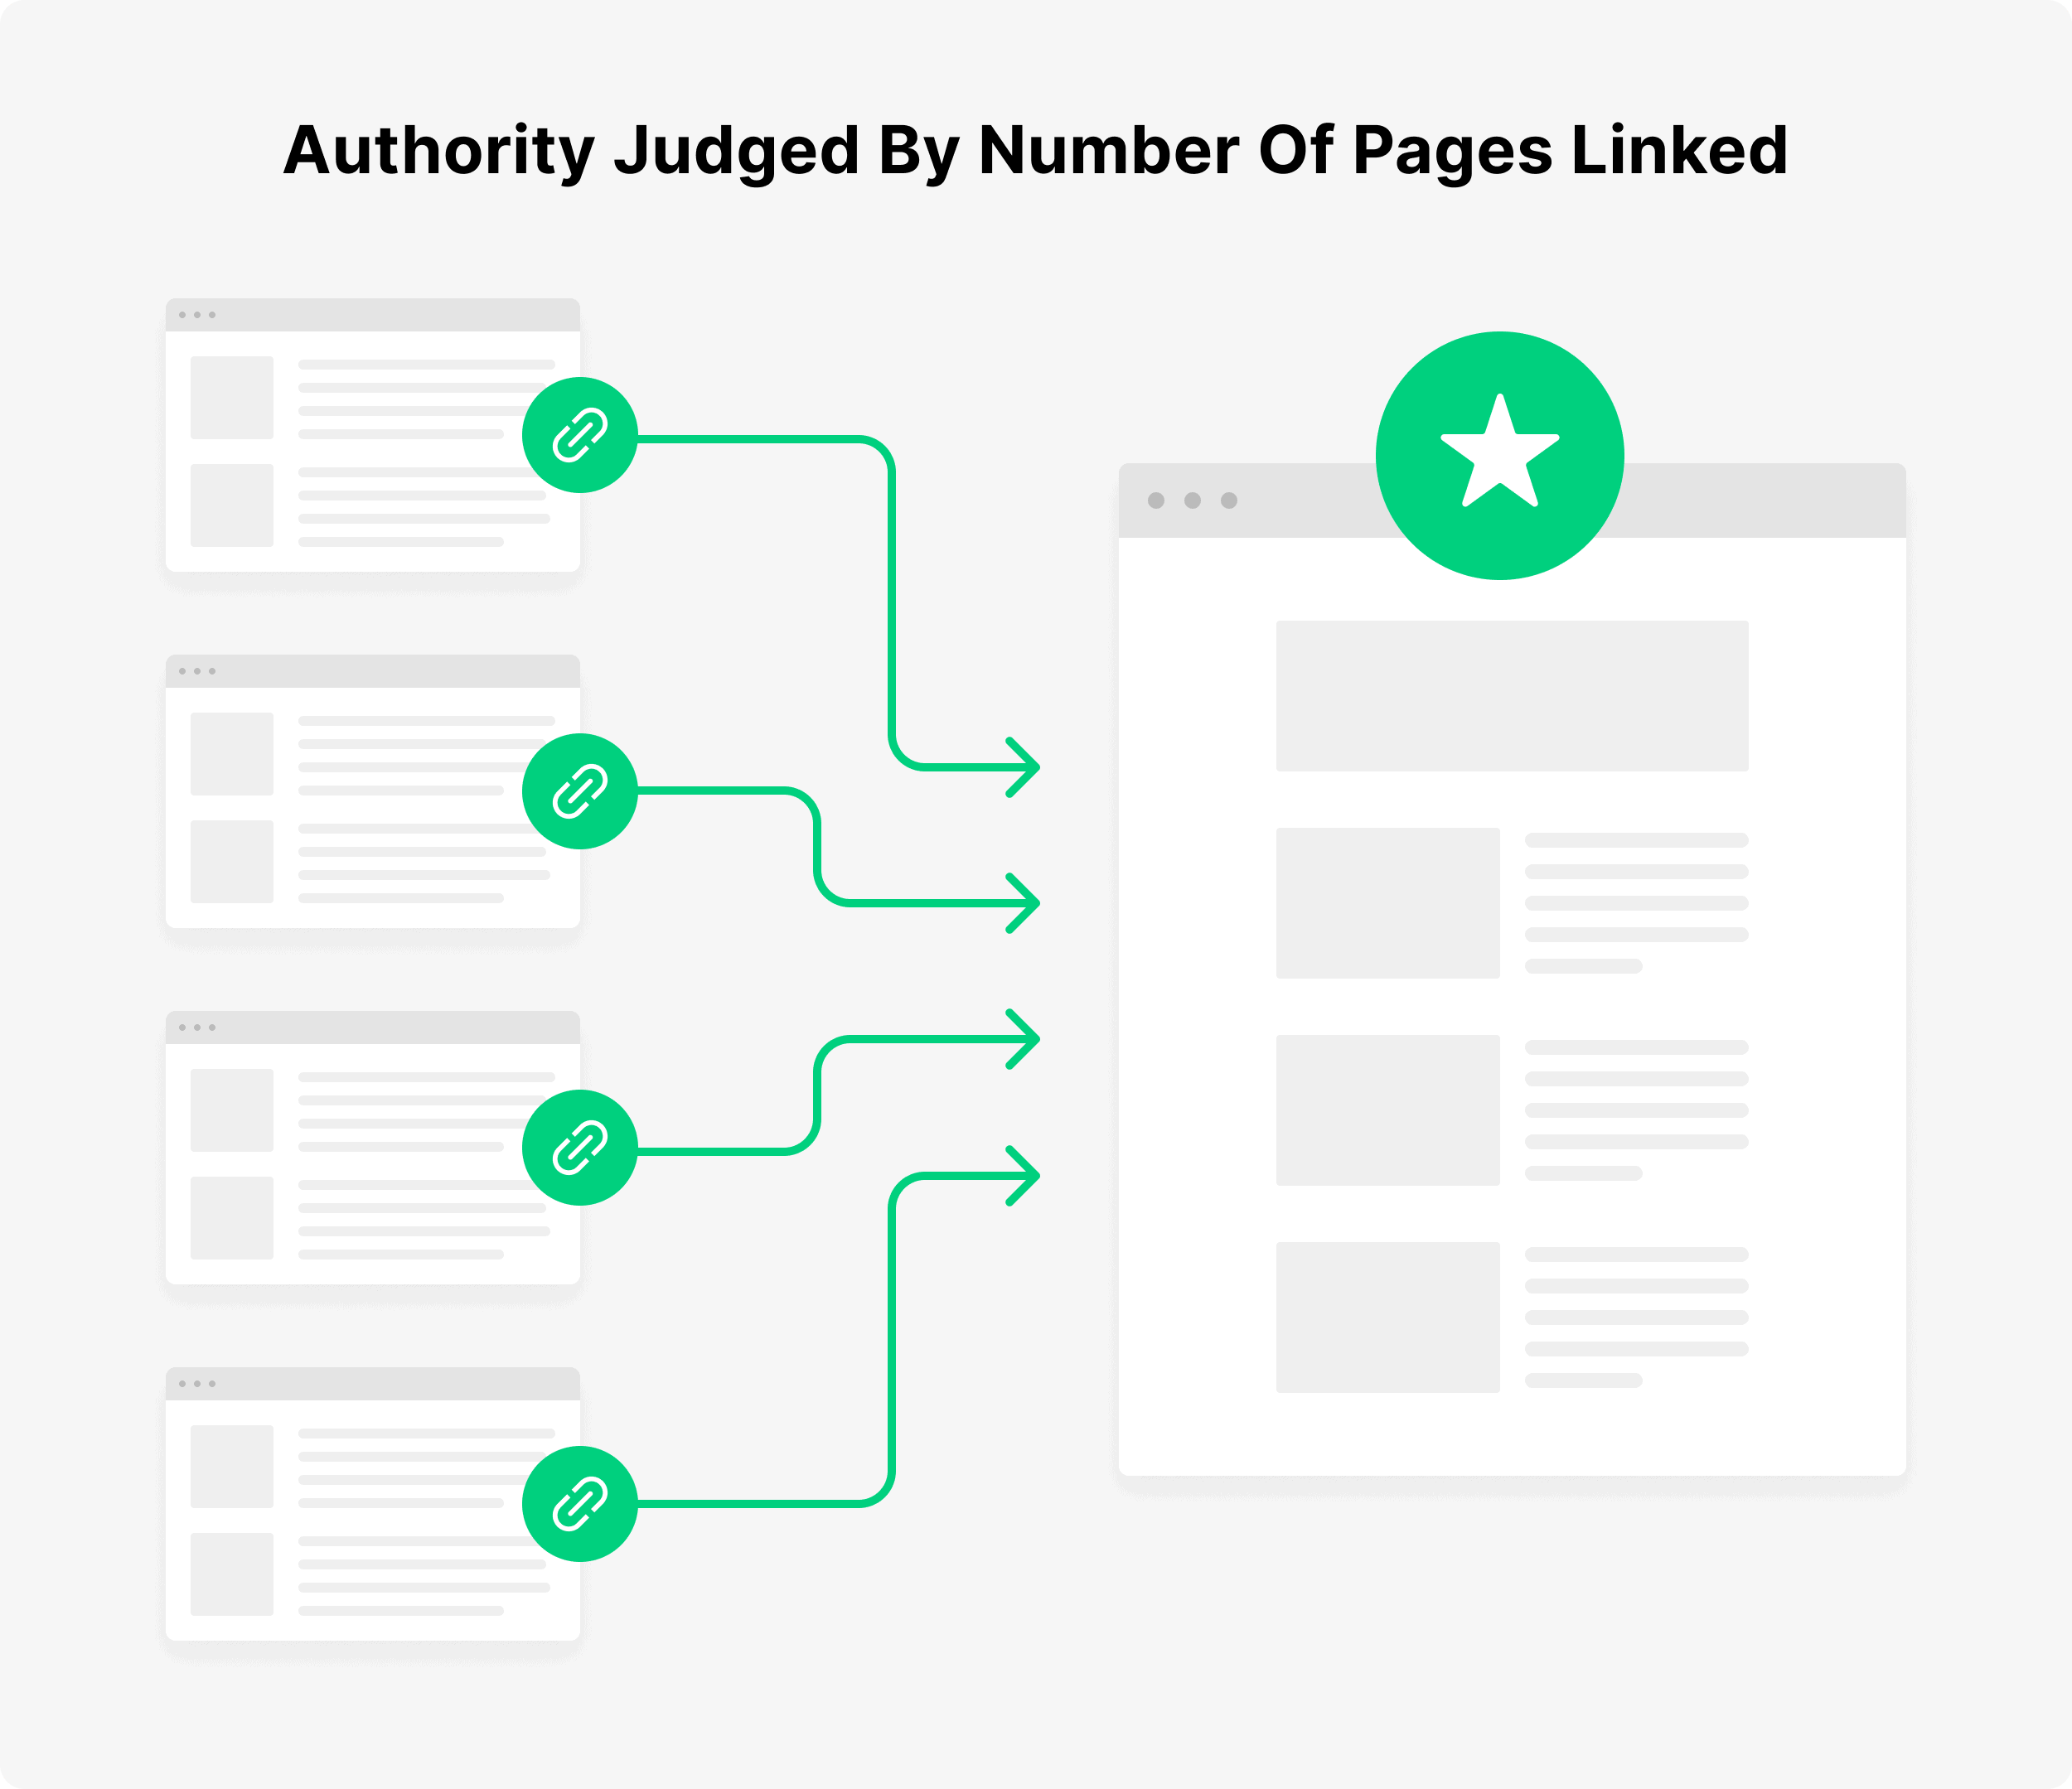 Authority judged by number of pages linked